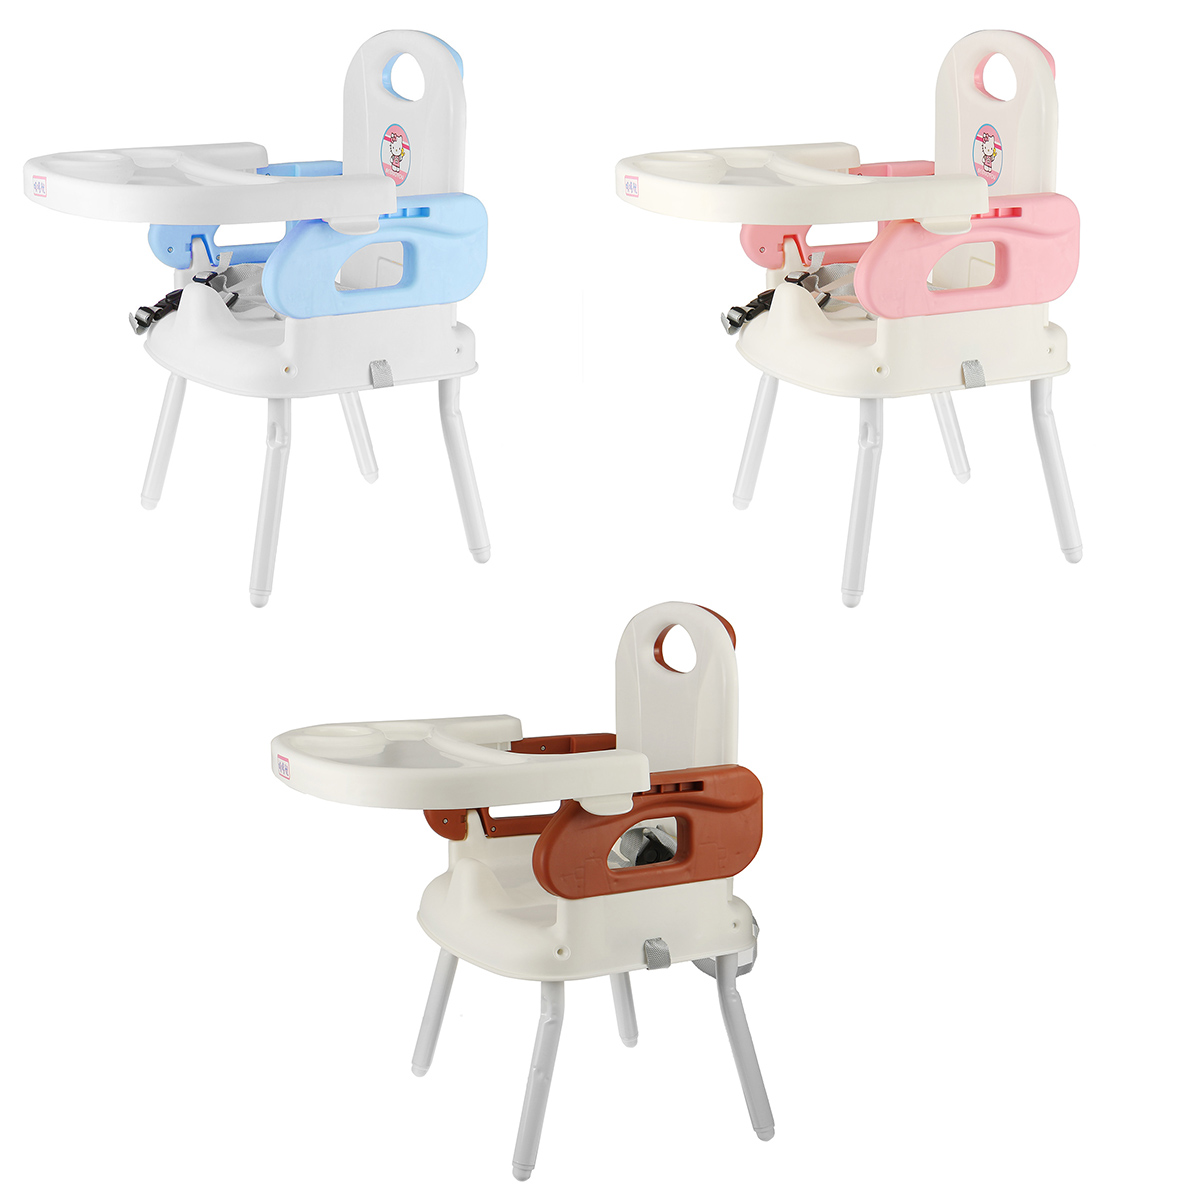 Folding-Baby-Dining-Chair-Child-Feeding-Seat-Eating-Toddler-Booster-High-Chair-1830508-9